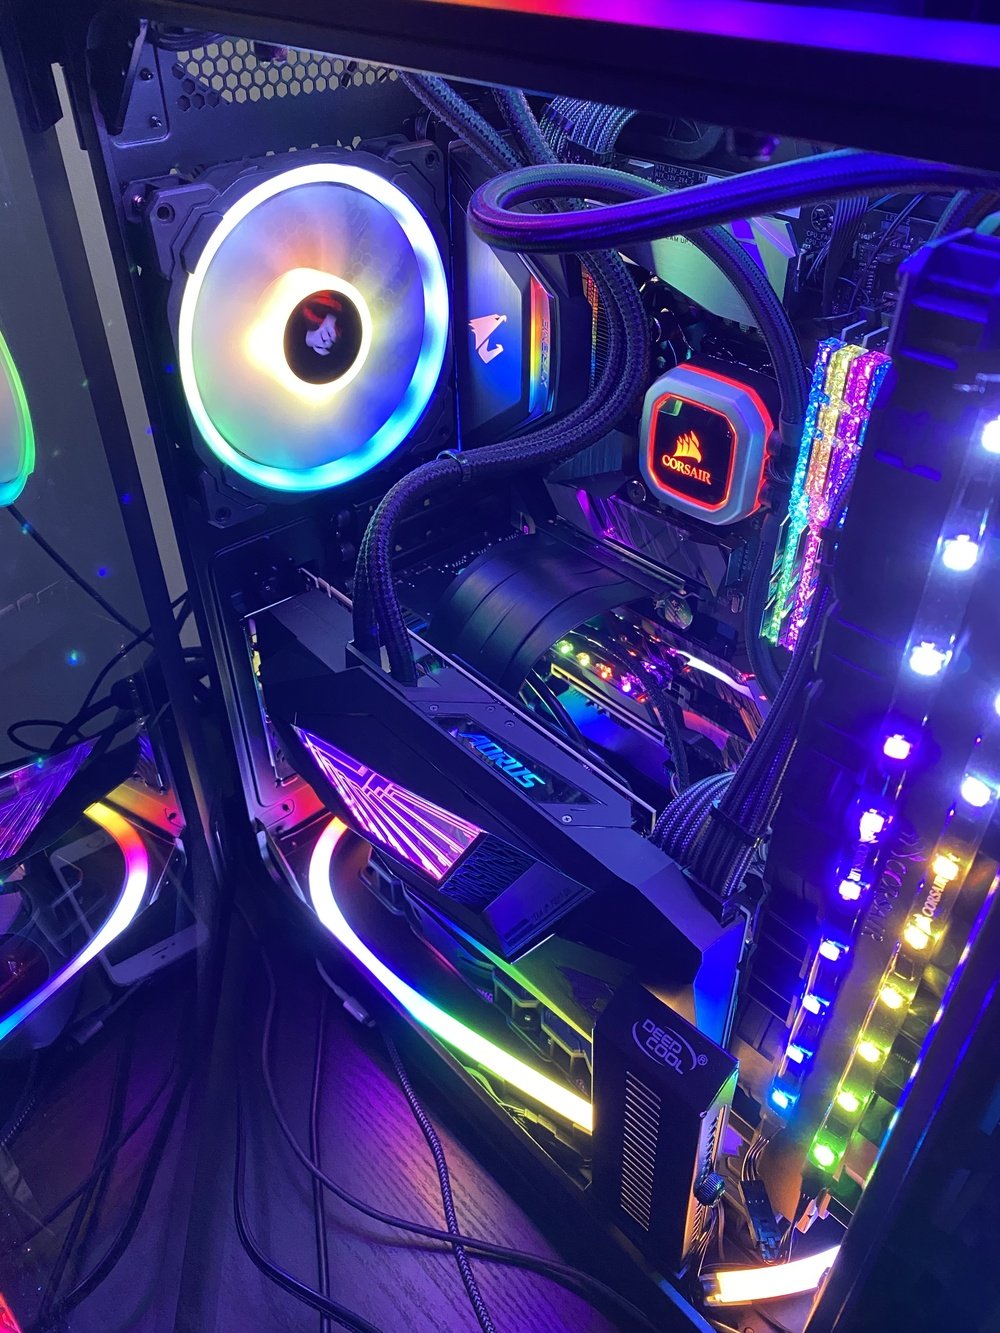 Loving the RGB on this gaming beast!